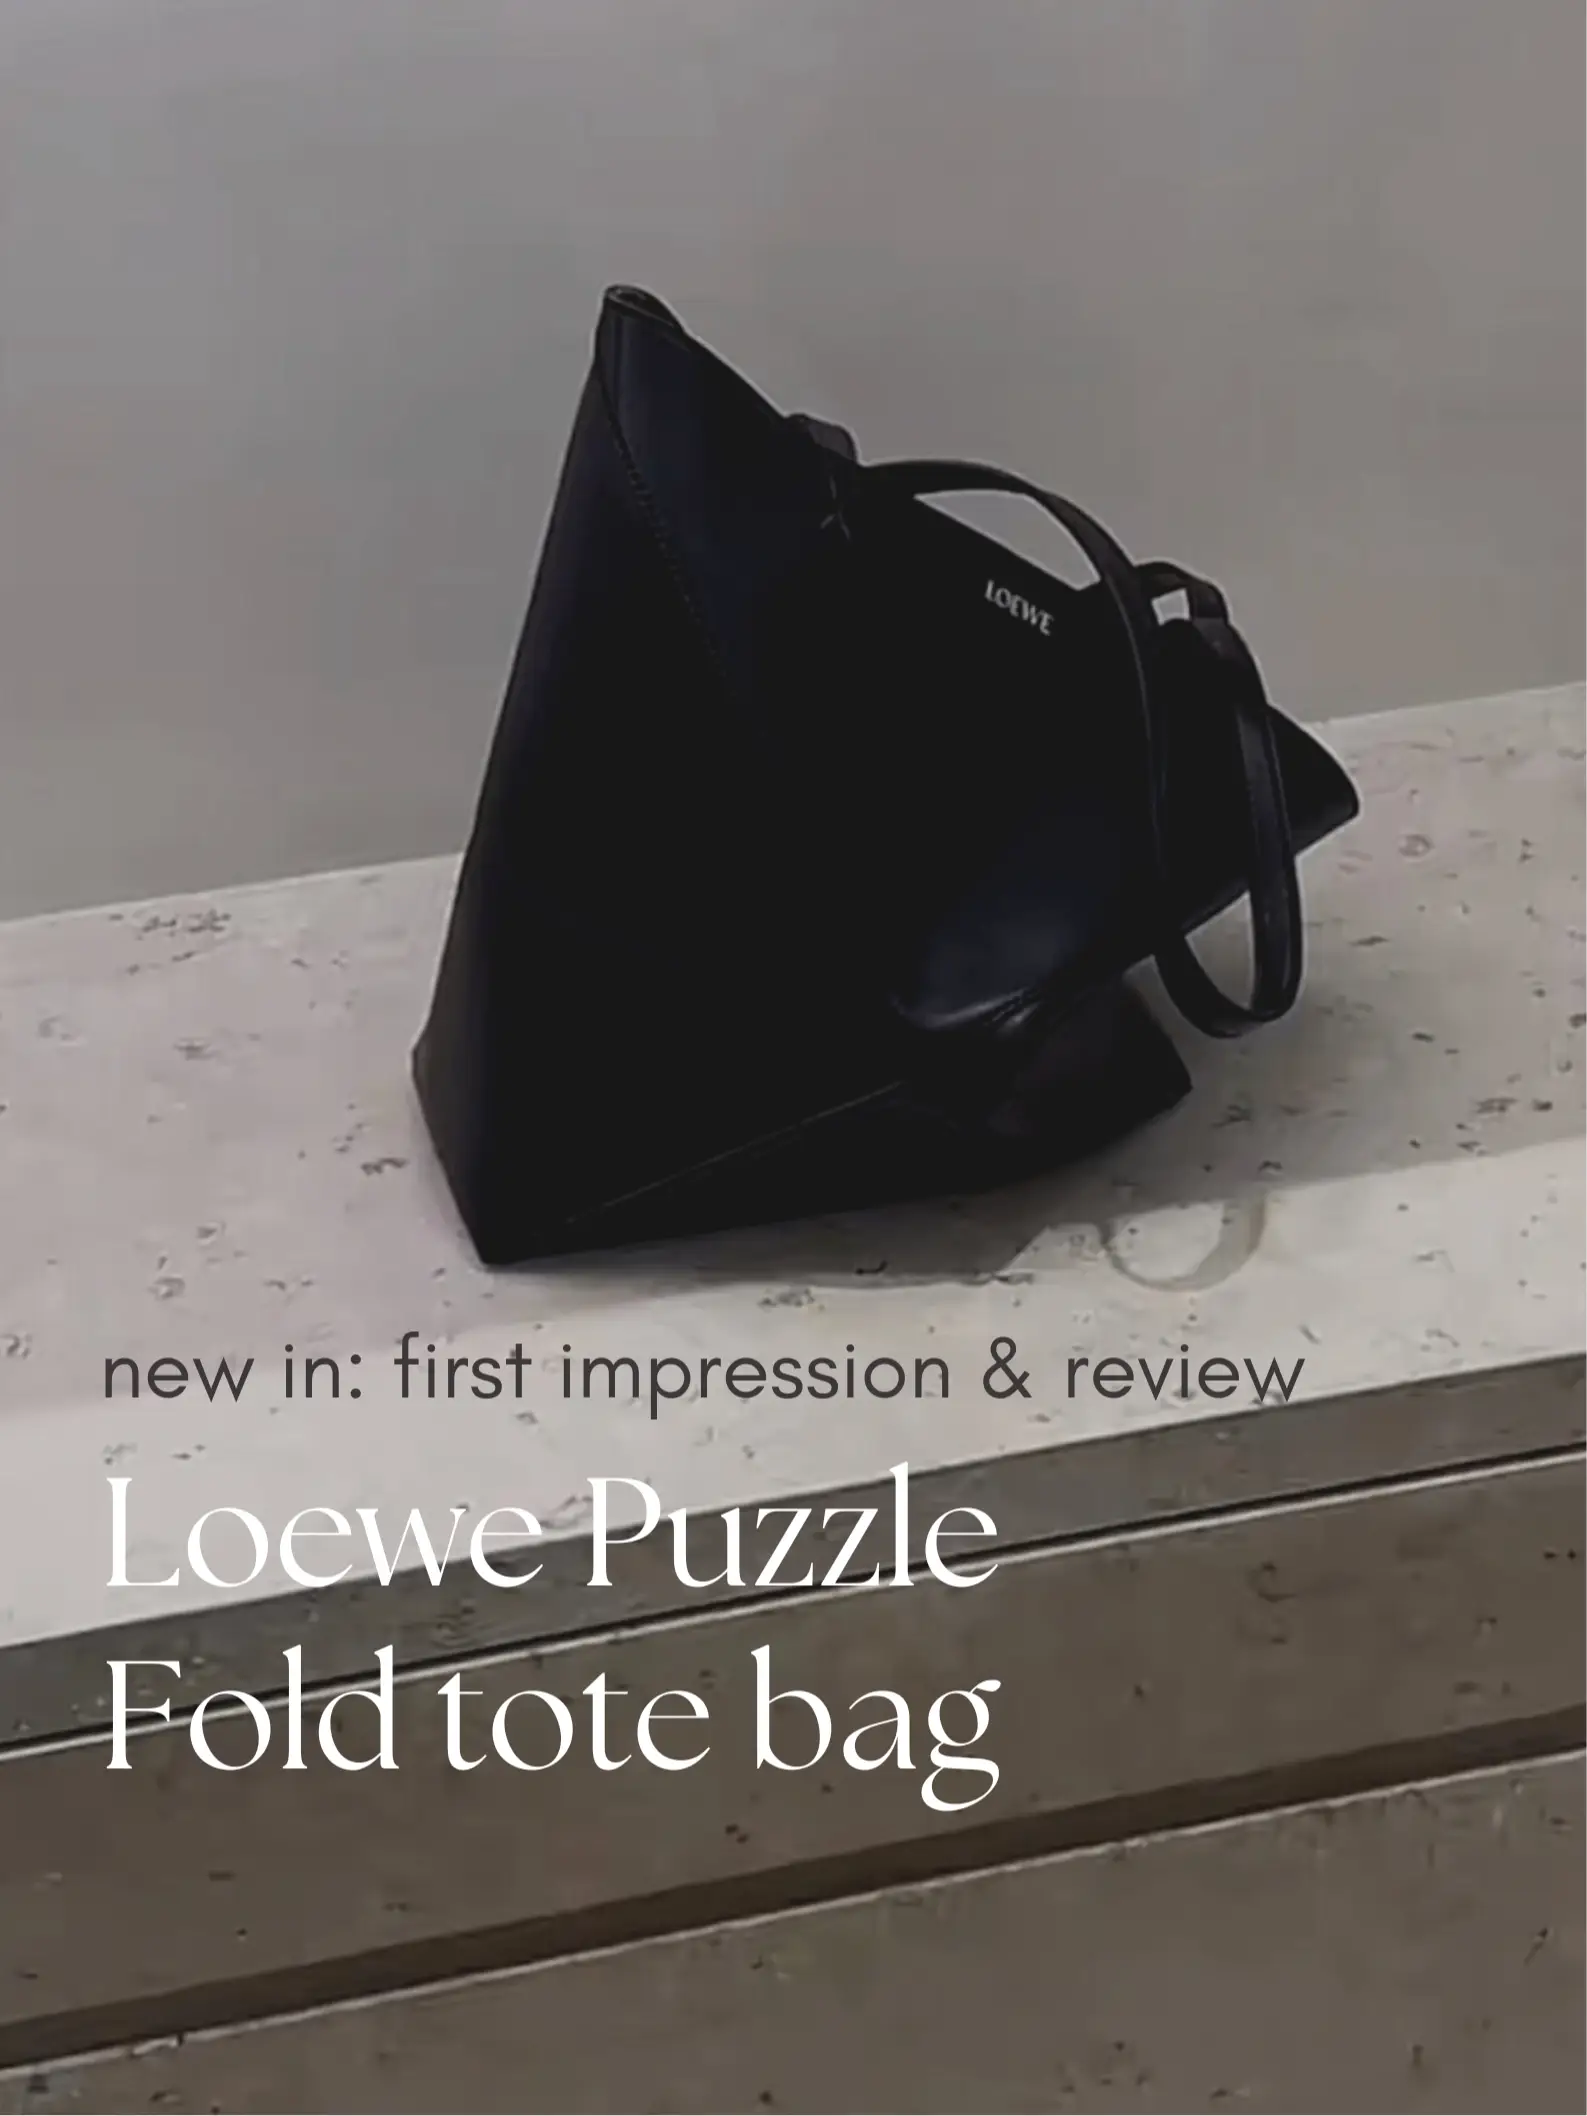 Love me some new bottega but sometimes an it-bag just isn't it